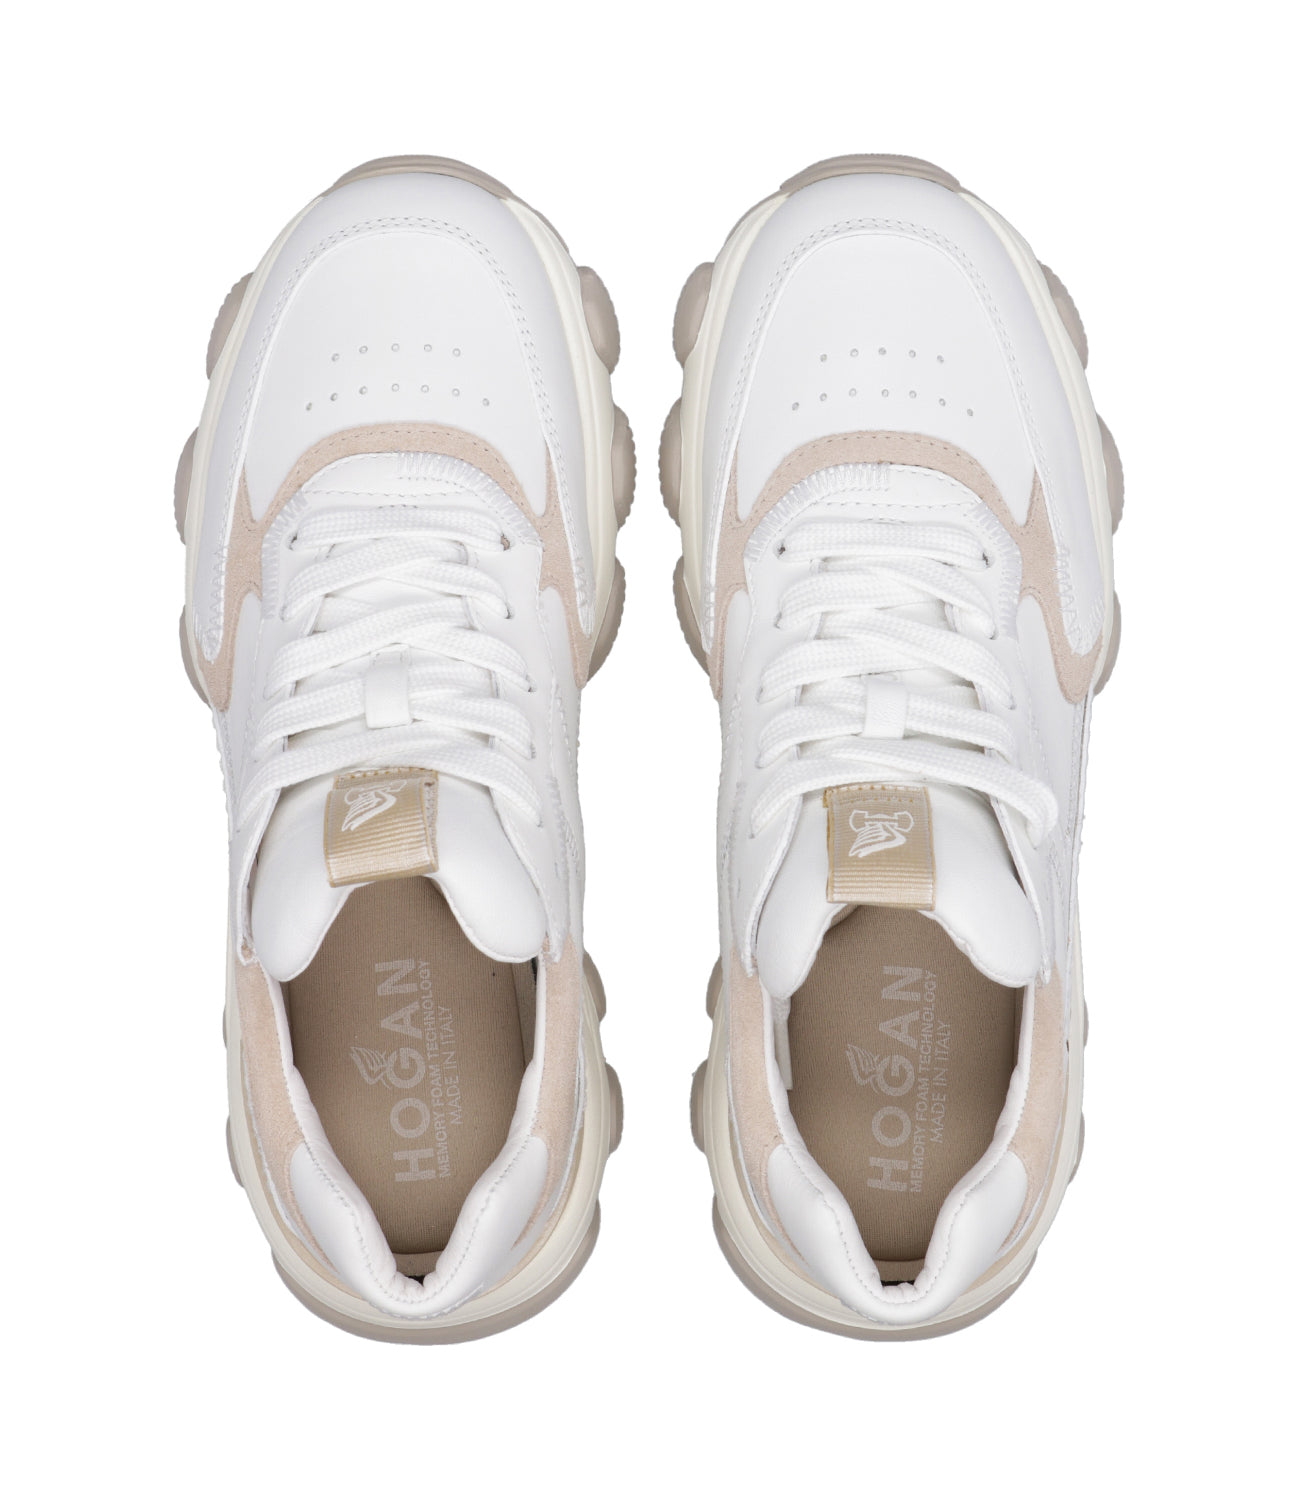 Hogan | Hyperactive Sneakers Beige and White